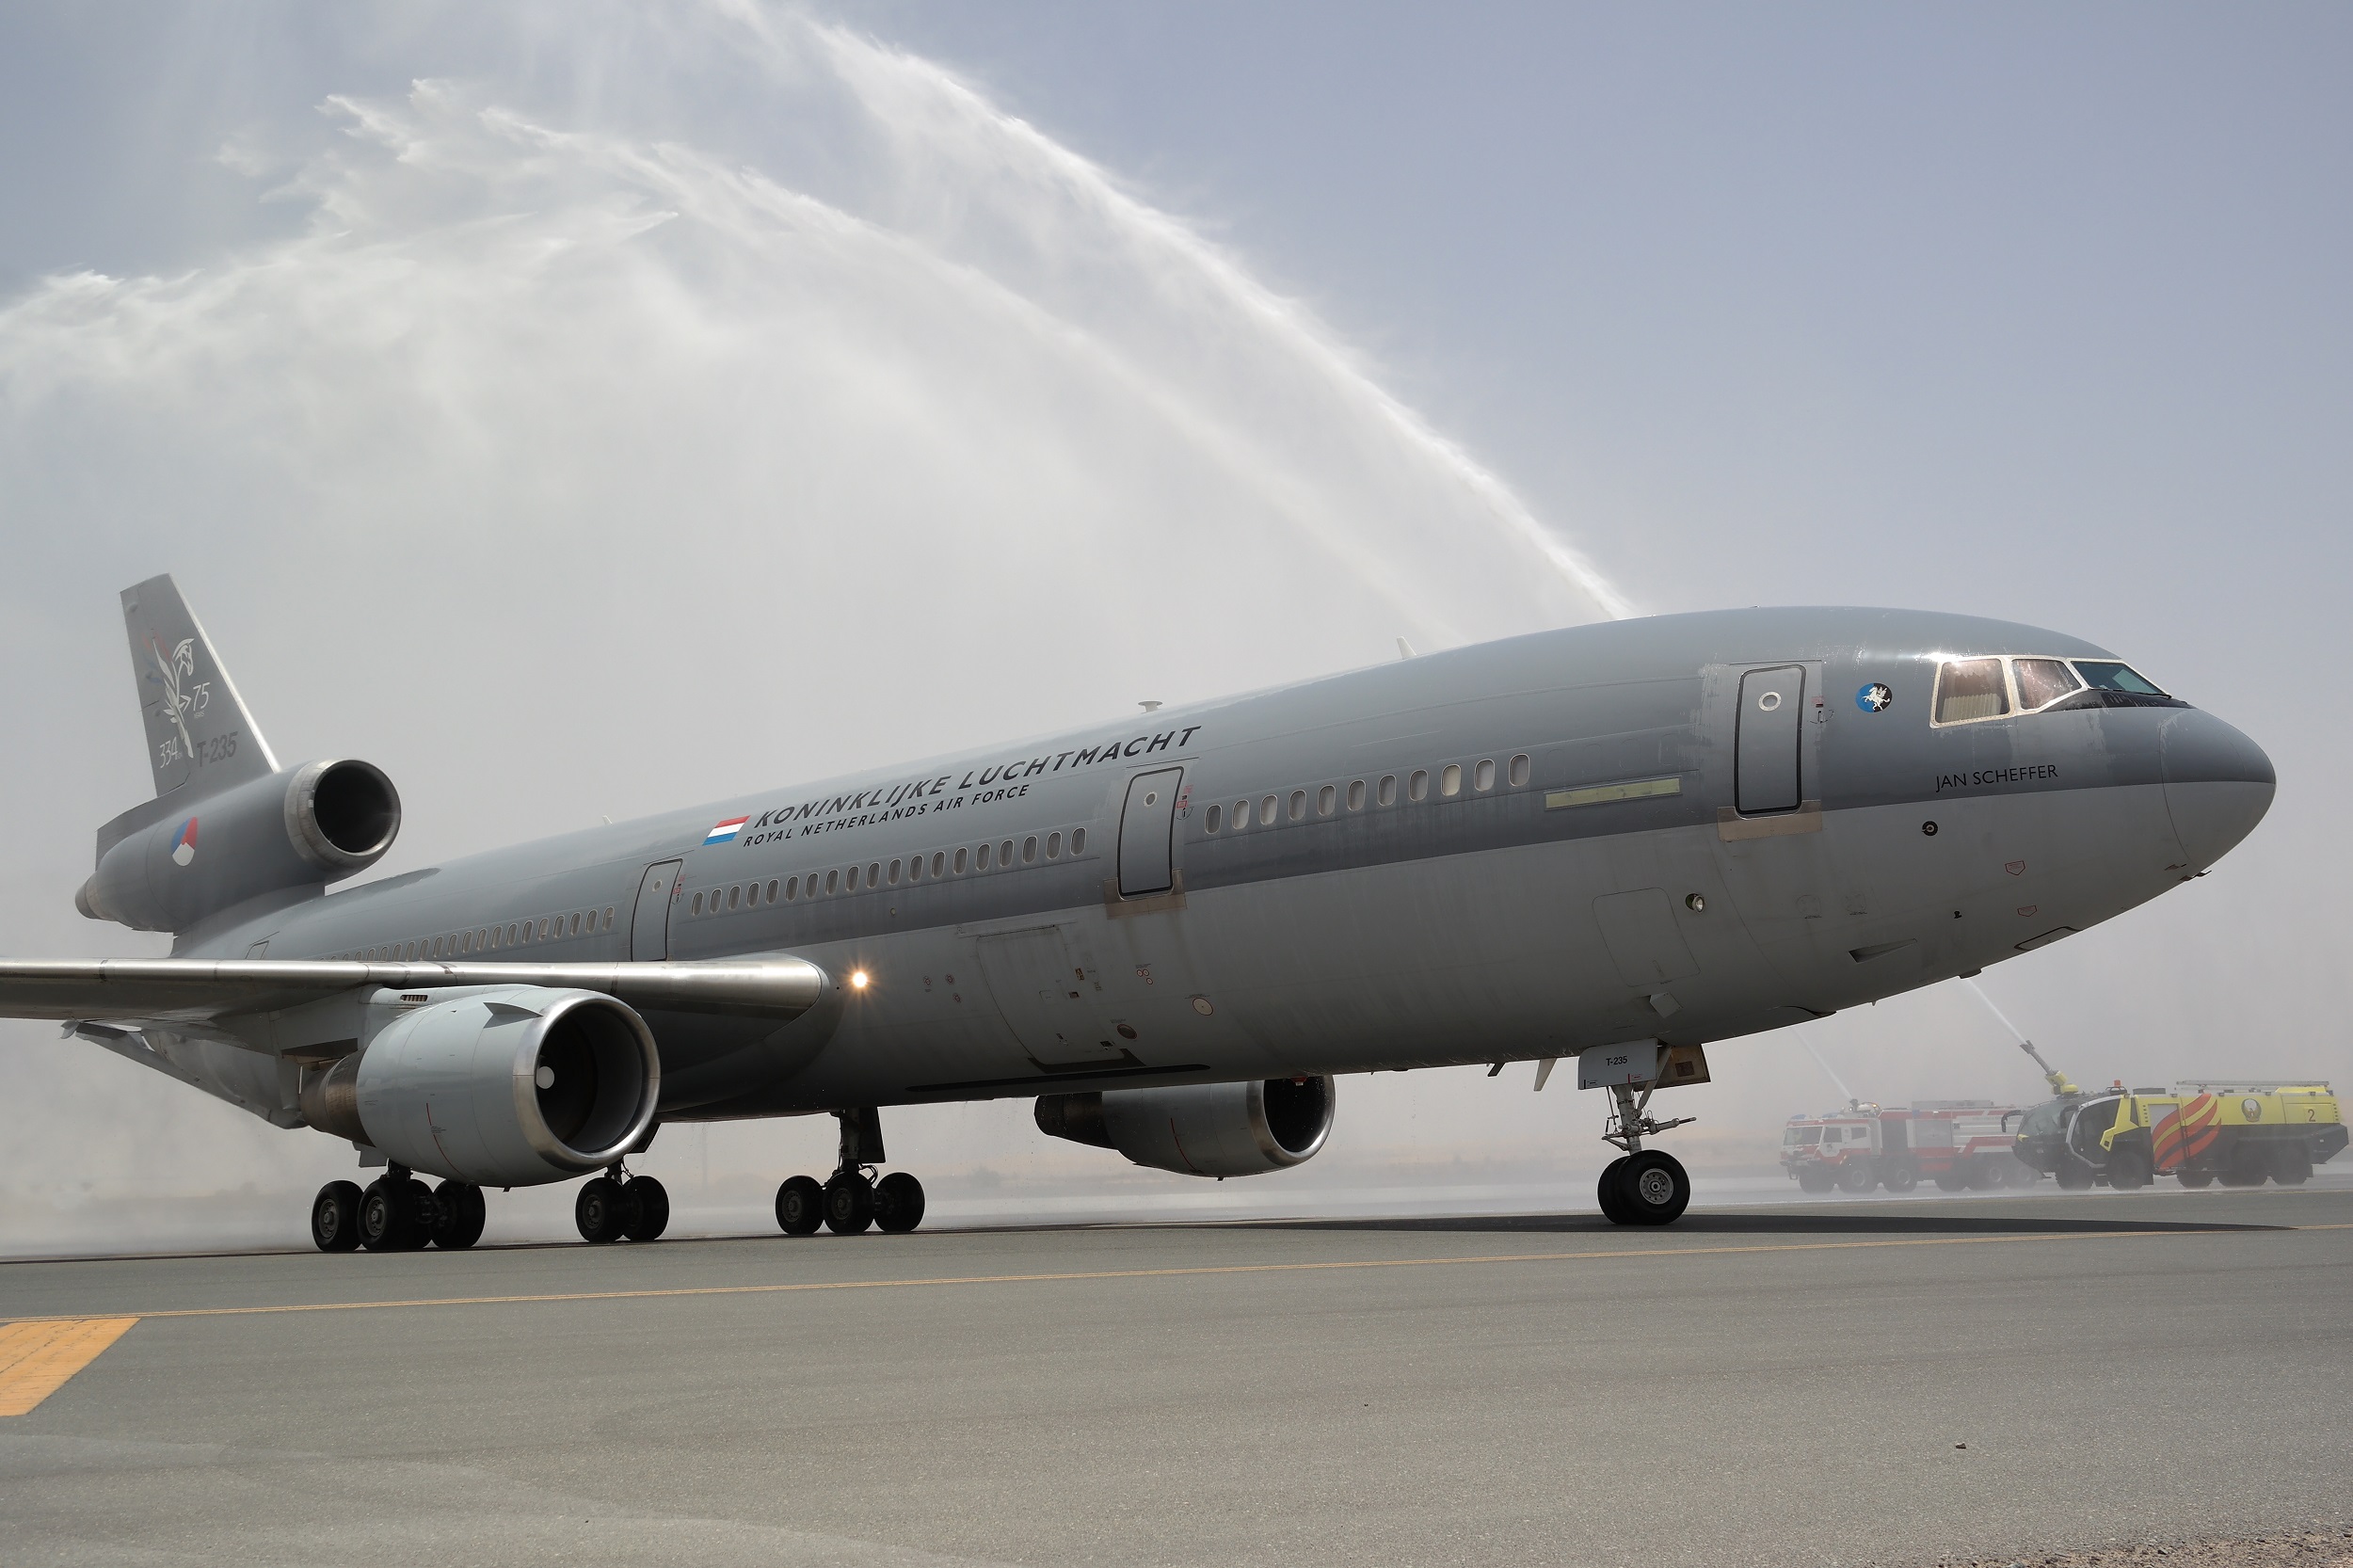 Extra fuel, the mission saver of the last Dutch redeployment mission to Afghanistan